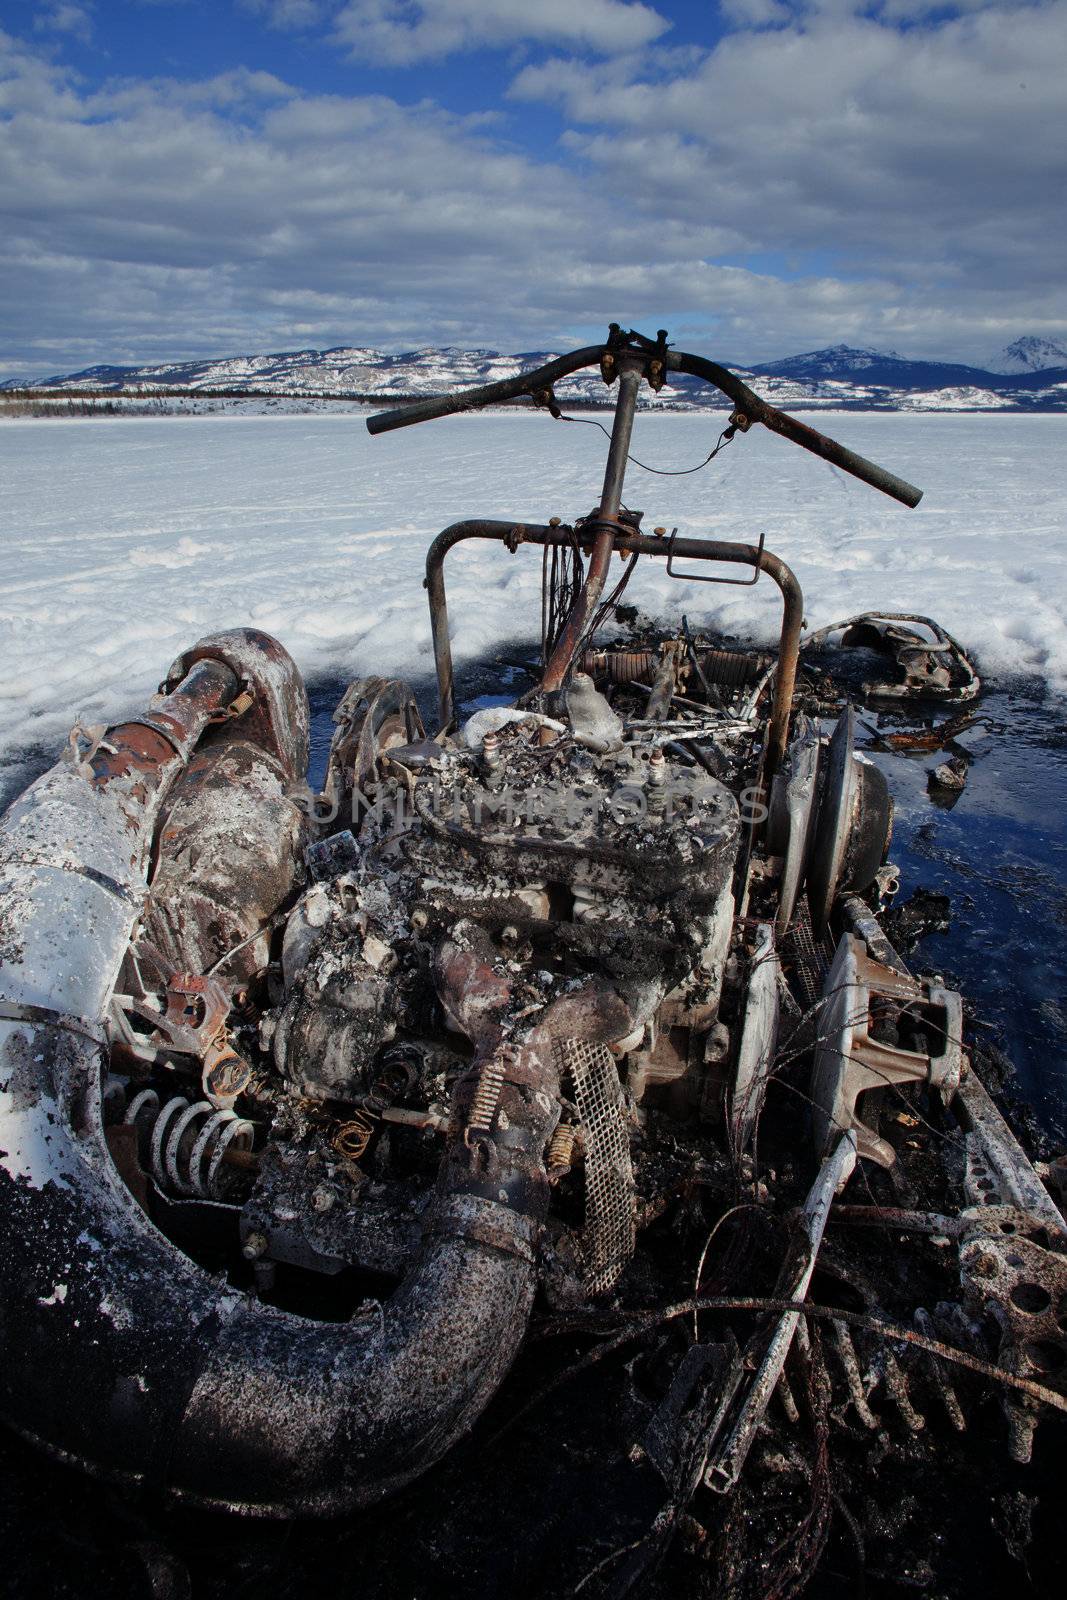 Charred remains of snowmobile burnt out in a winter motorsports mishap on frozen Lake Laberge Yukon Territory Canada